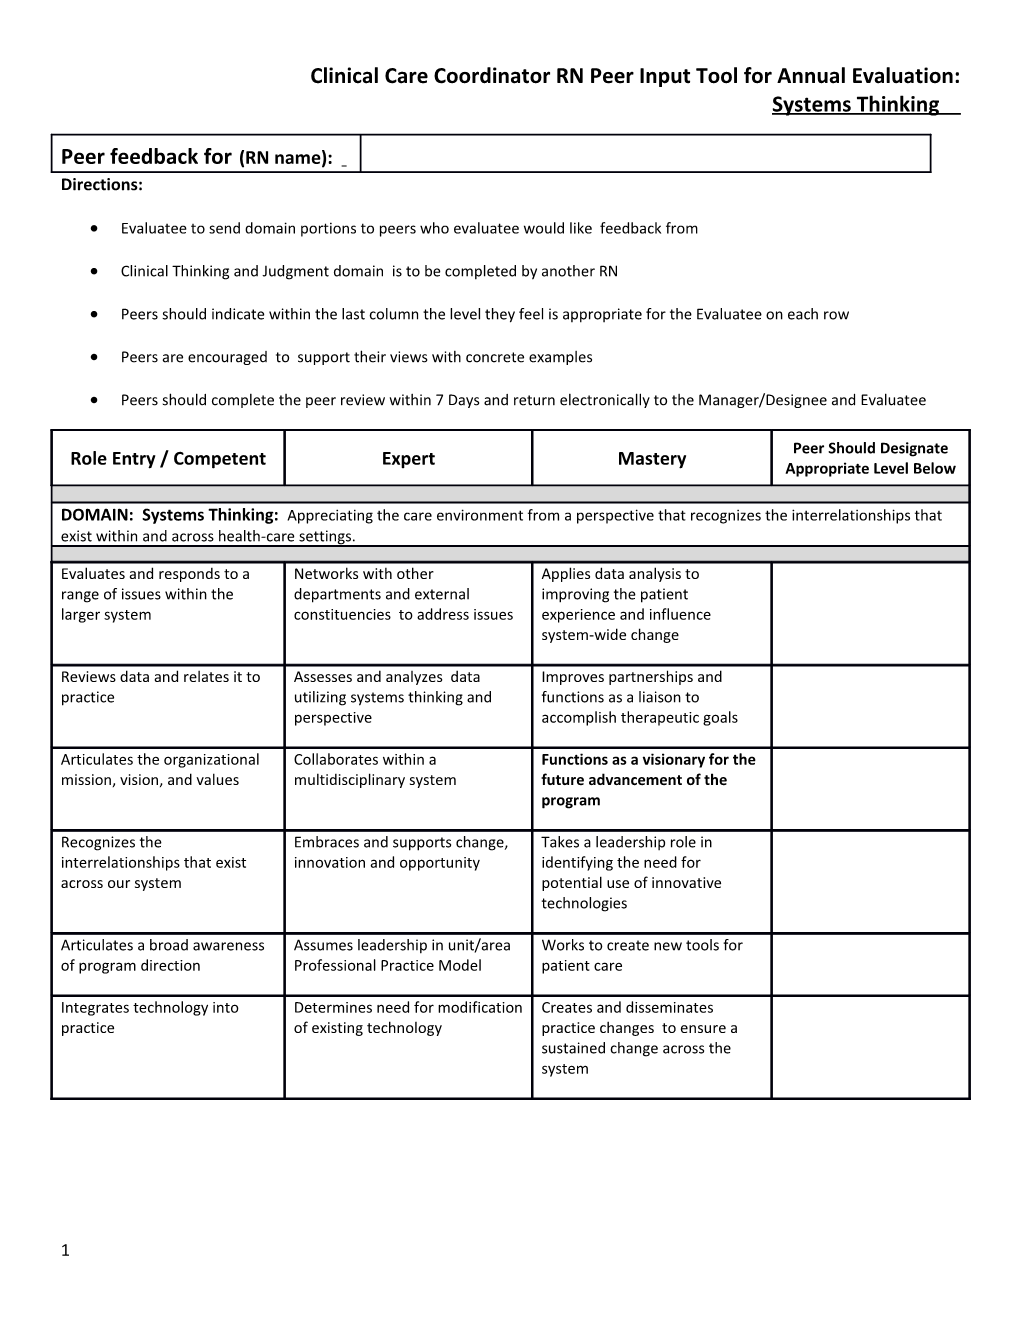 Clinical Care Coordinatorrn Peer Input Tool for Annual Evaluation: Systems Thinking